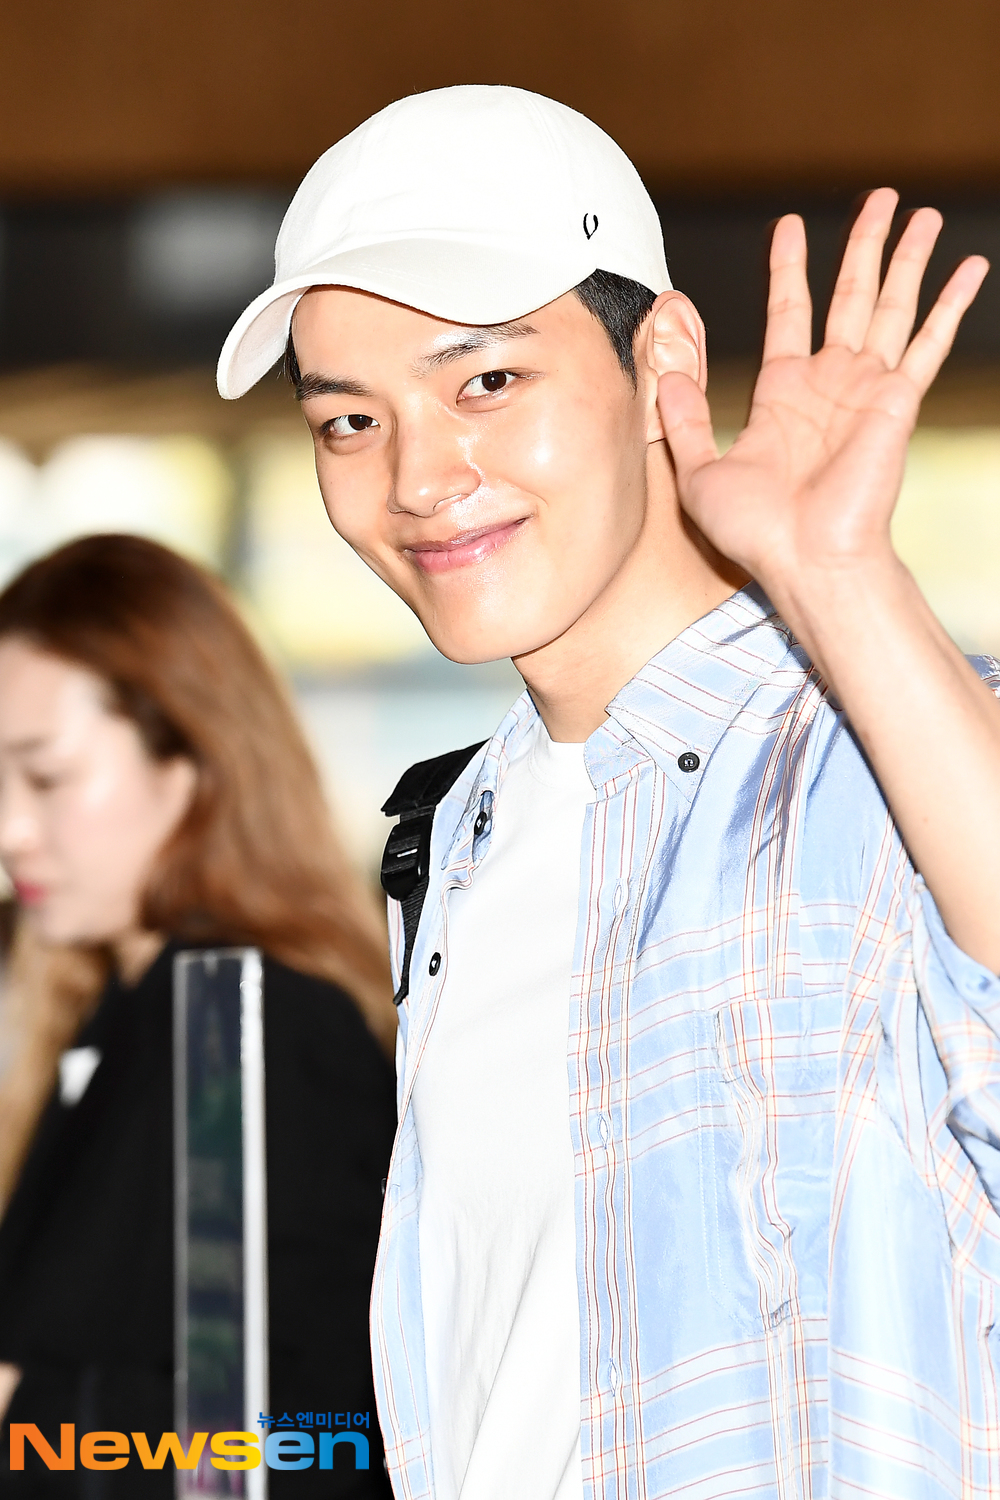 <p>Actor Yeo Jin-goo (Yeo Jin-goo)4 12 afternoon Seoul Gangseo way car Gimpo International Airport to Japan through in JAPAN FANMEETING 2019 -Brilliant Spring Day-the overseas fan meeting certain car Japan Tokyo Haneda with the departure.</p><p>Actor Yeo Jin-goo (Yeo Jin-goo), Tokyo Haneda with the departure.</p>